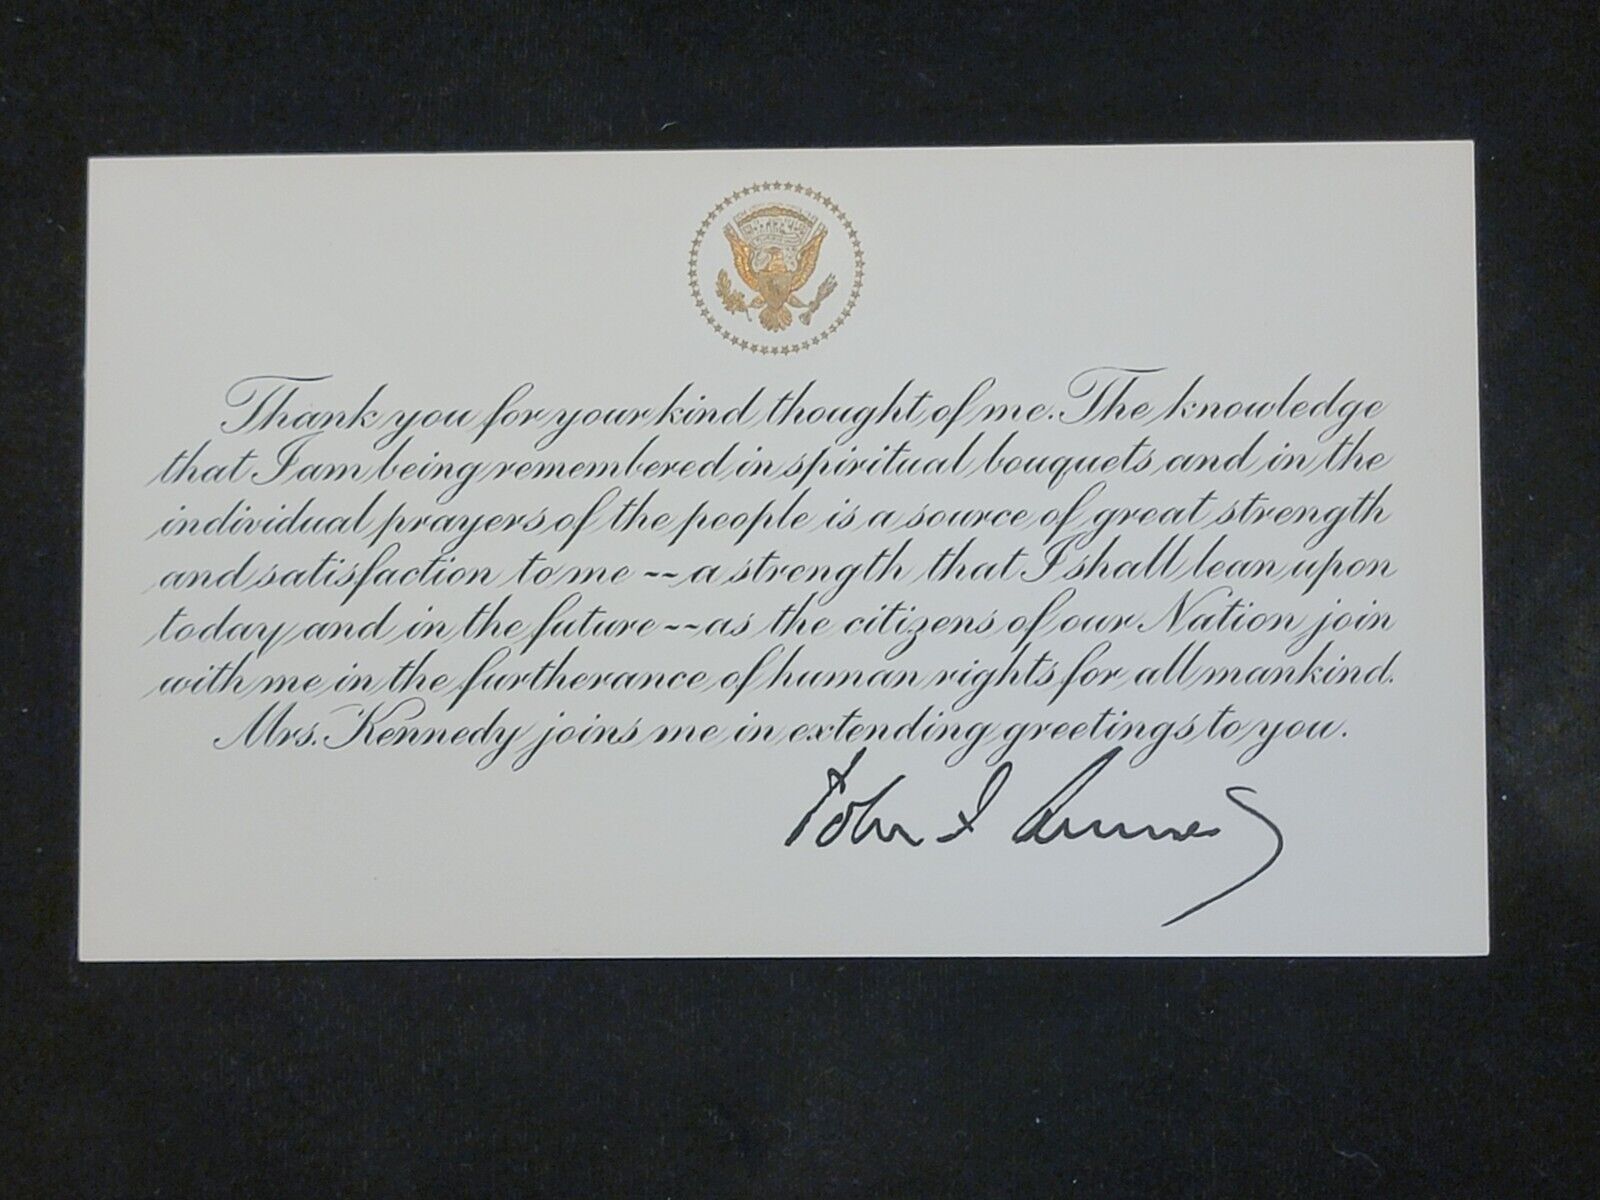 HISTORIC Content Presidential SEAL White House Note from President John Kennedy